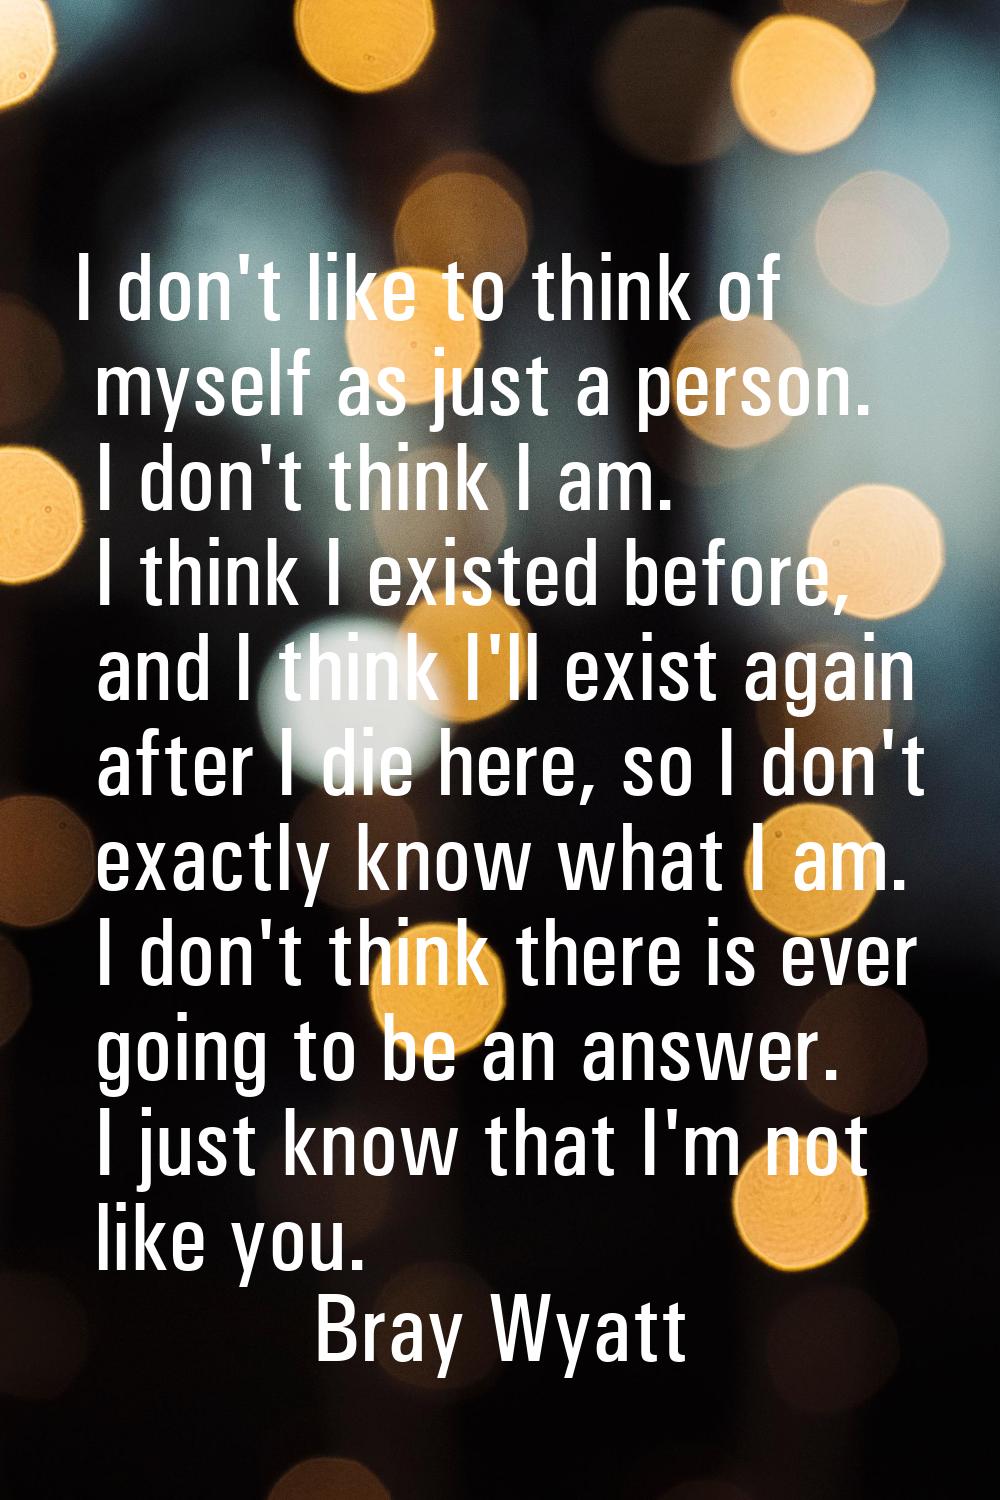 I don't like to think of myself as just a person. I don't think I am. I think I existed before, and